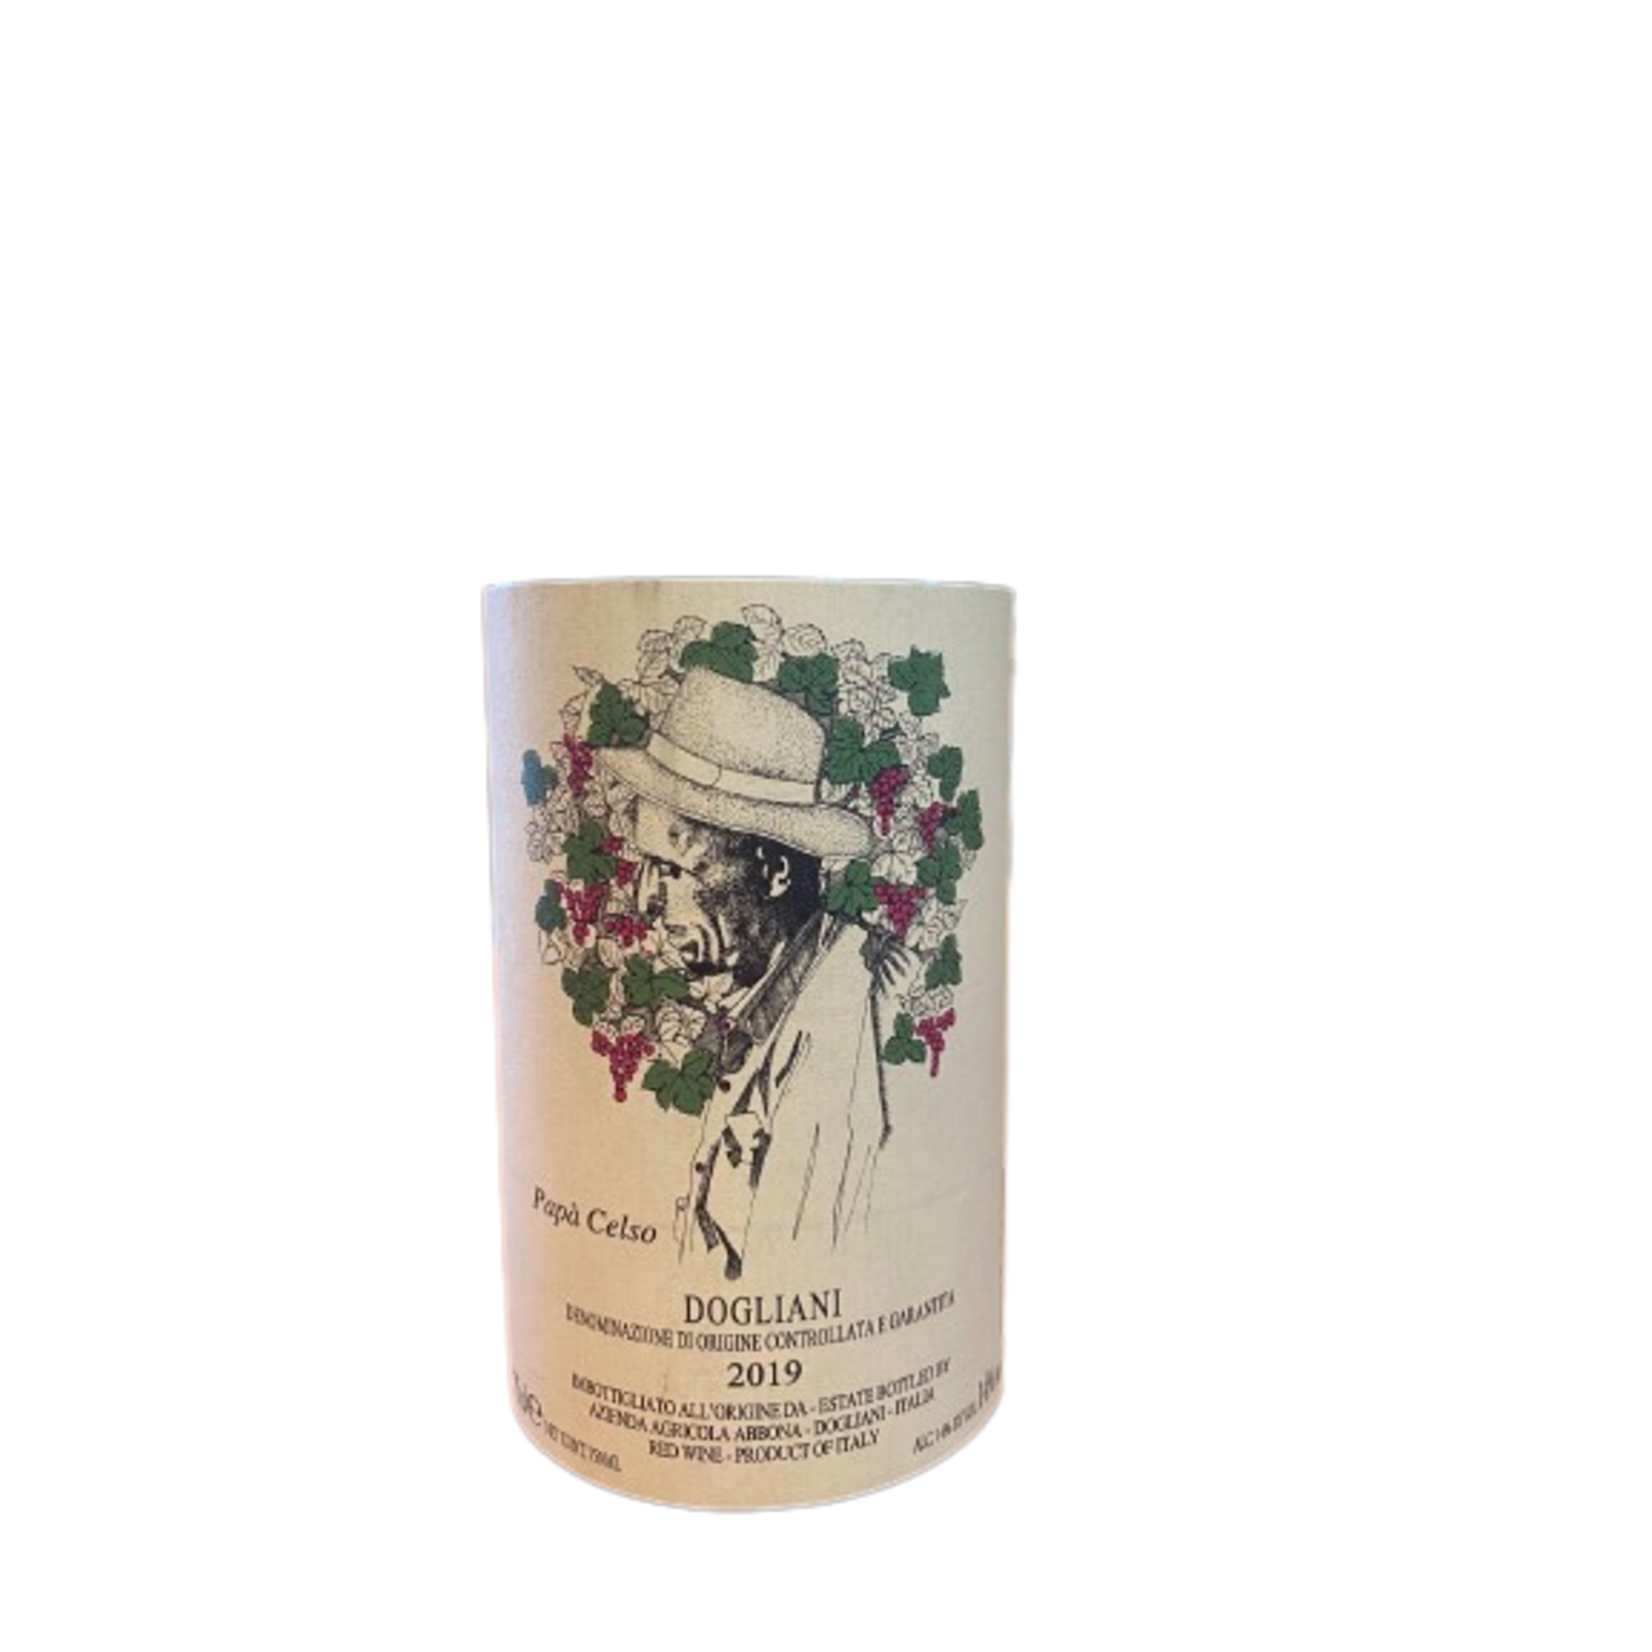 Papa Celso Marziano Abbona Papa Celso Dogliani Dolcetto 2019  Piedmont Italy